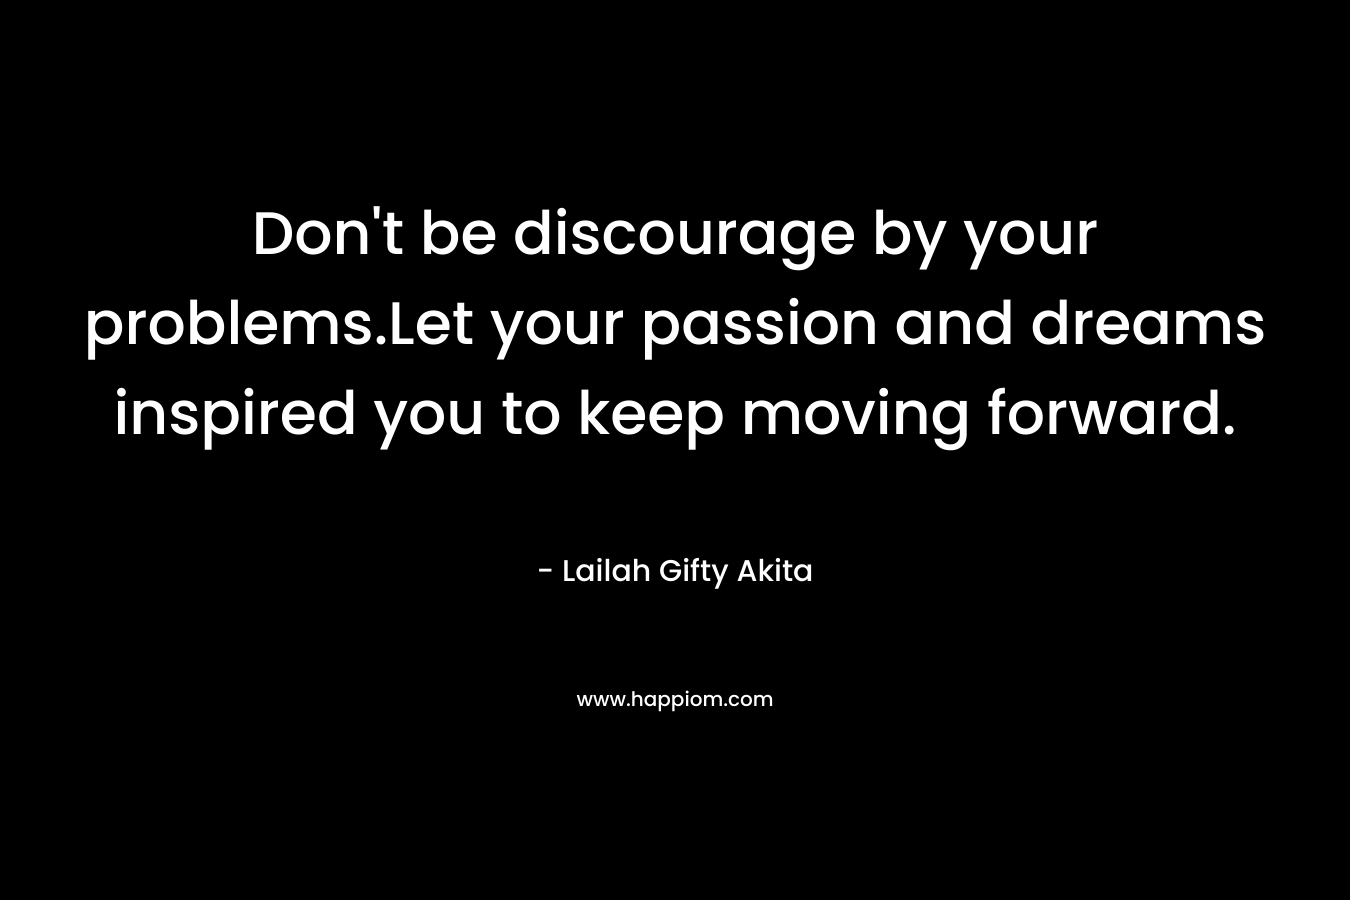 Don't be discourage by your problems.Let your passion and dreams inspired you to keep moving forward.